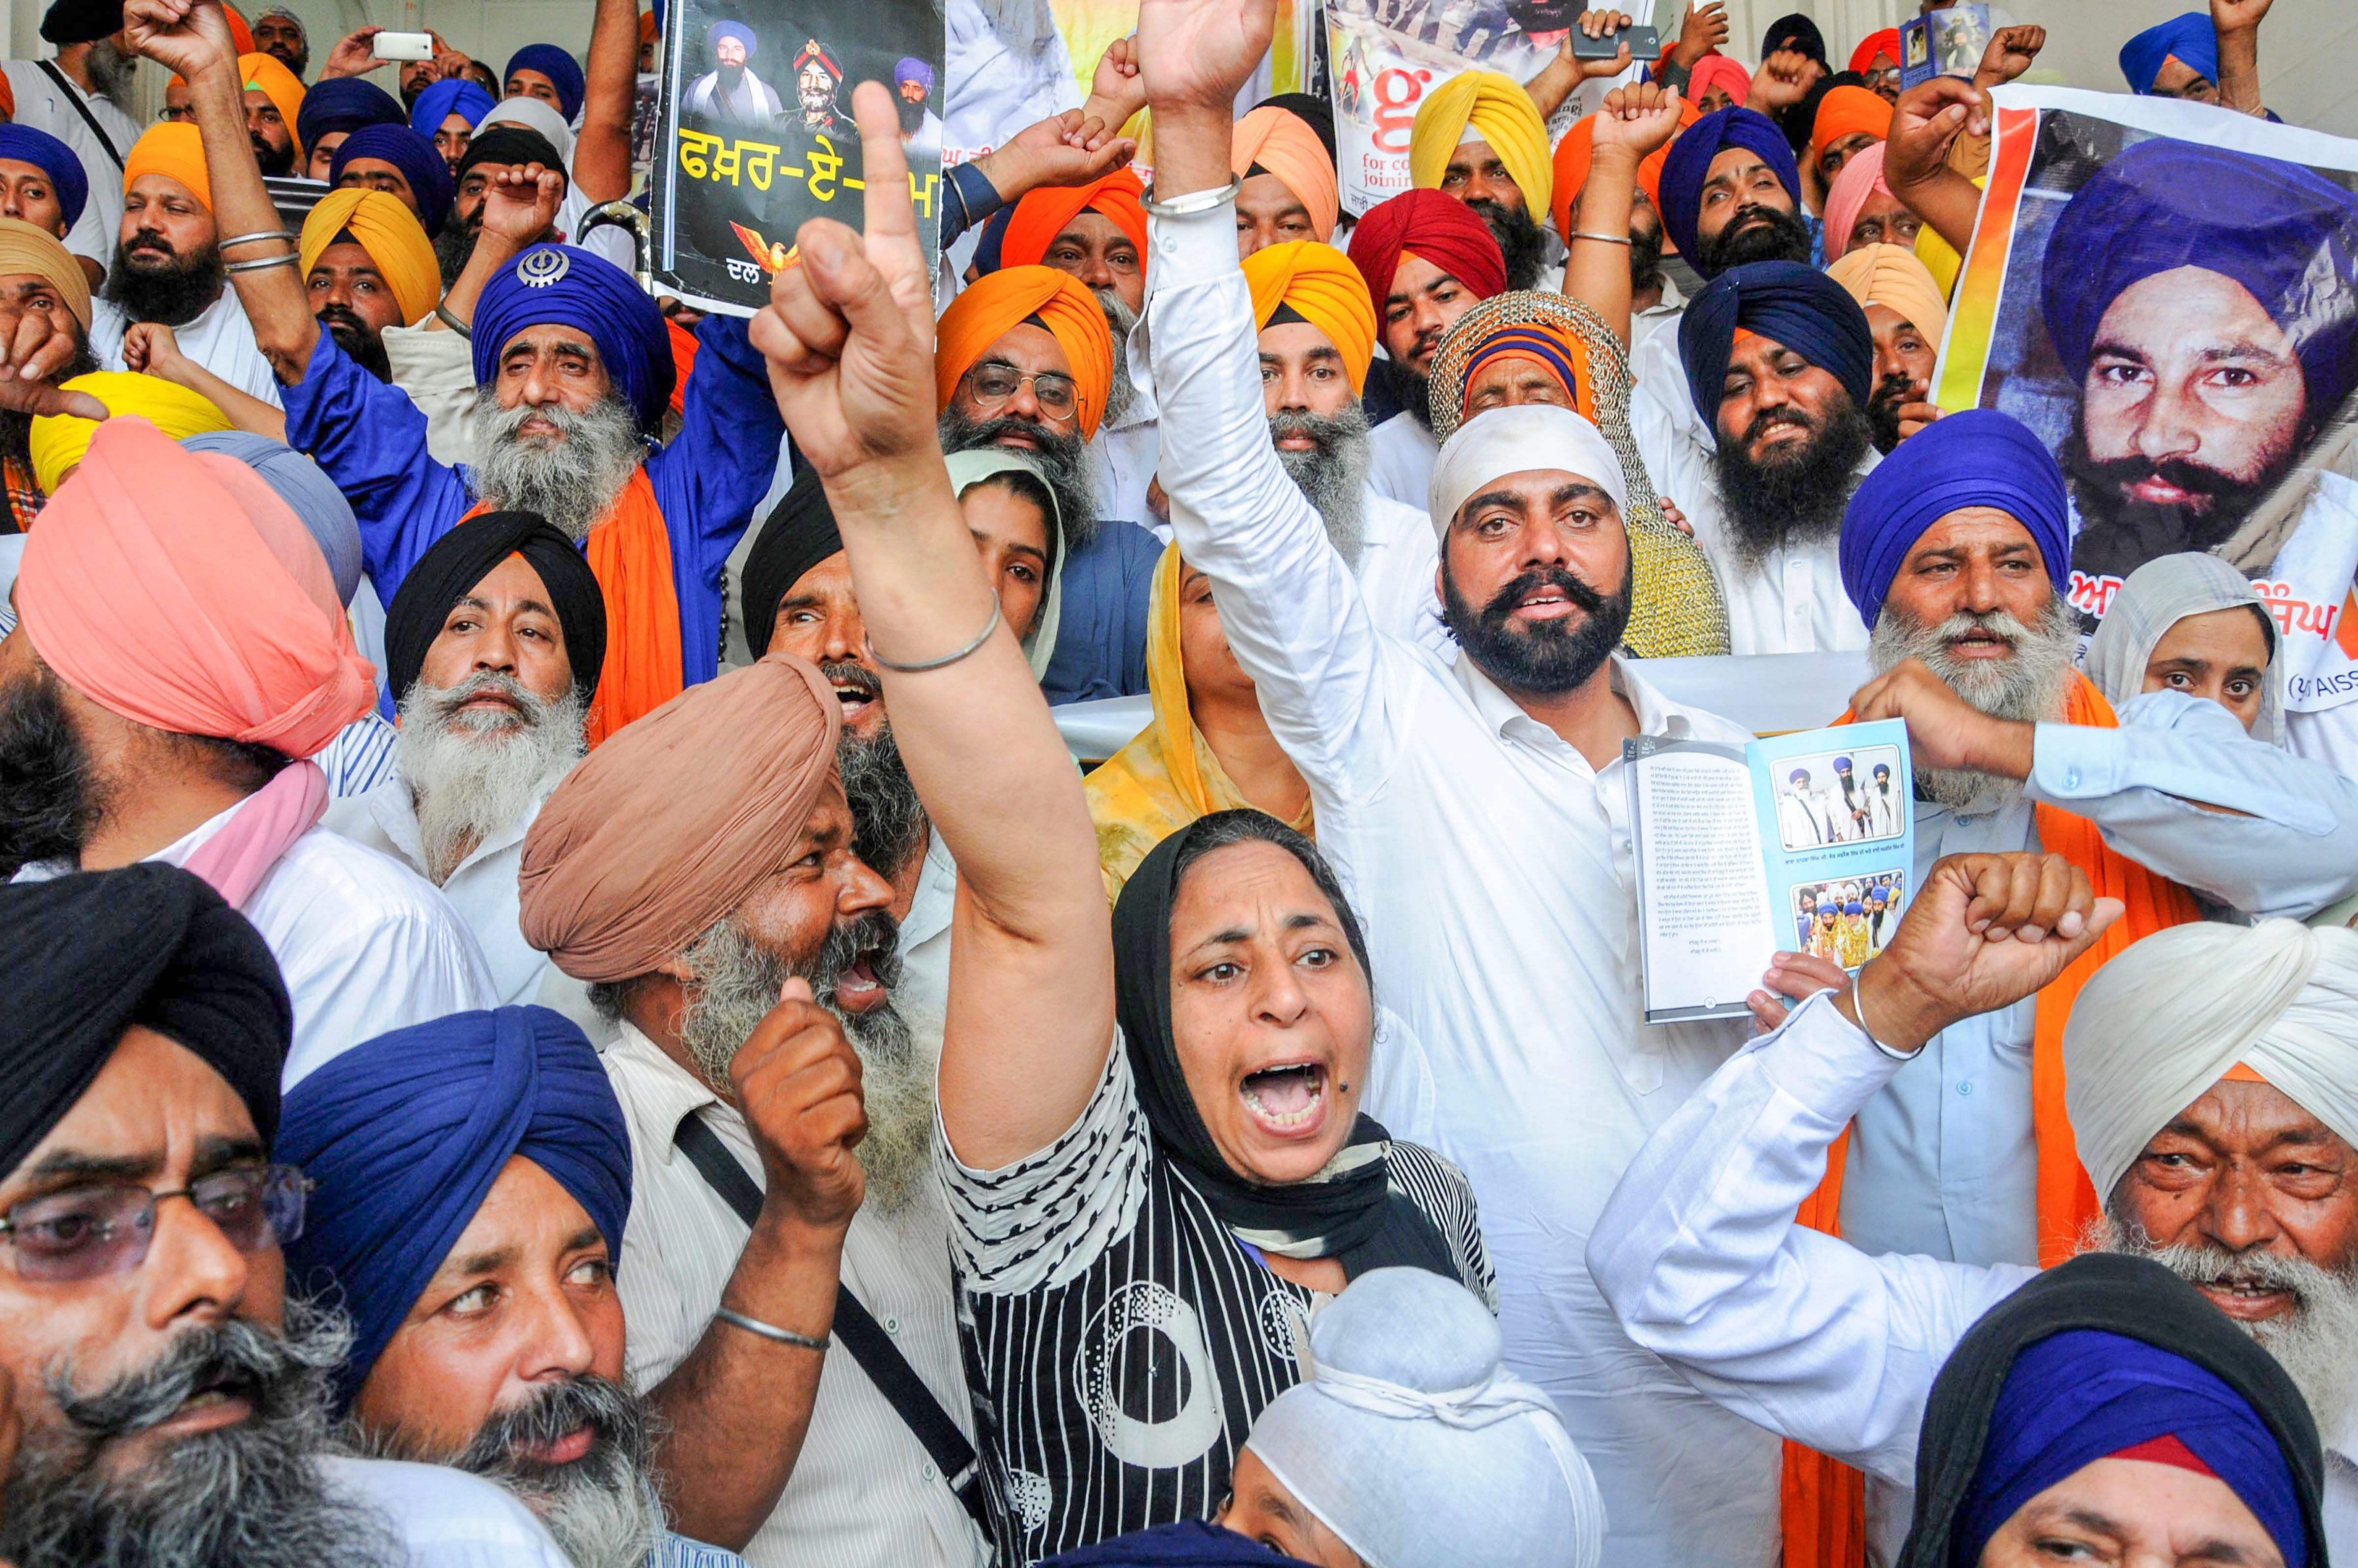 Supporters of radical Sikh organisations shout pro-Khalistan slogans at a demonstration marking the 34th anniversary of the Operation Blue Star,1984, at Golden Temple in Amritsar on Wednesday. PTI